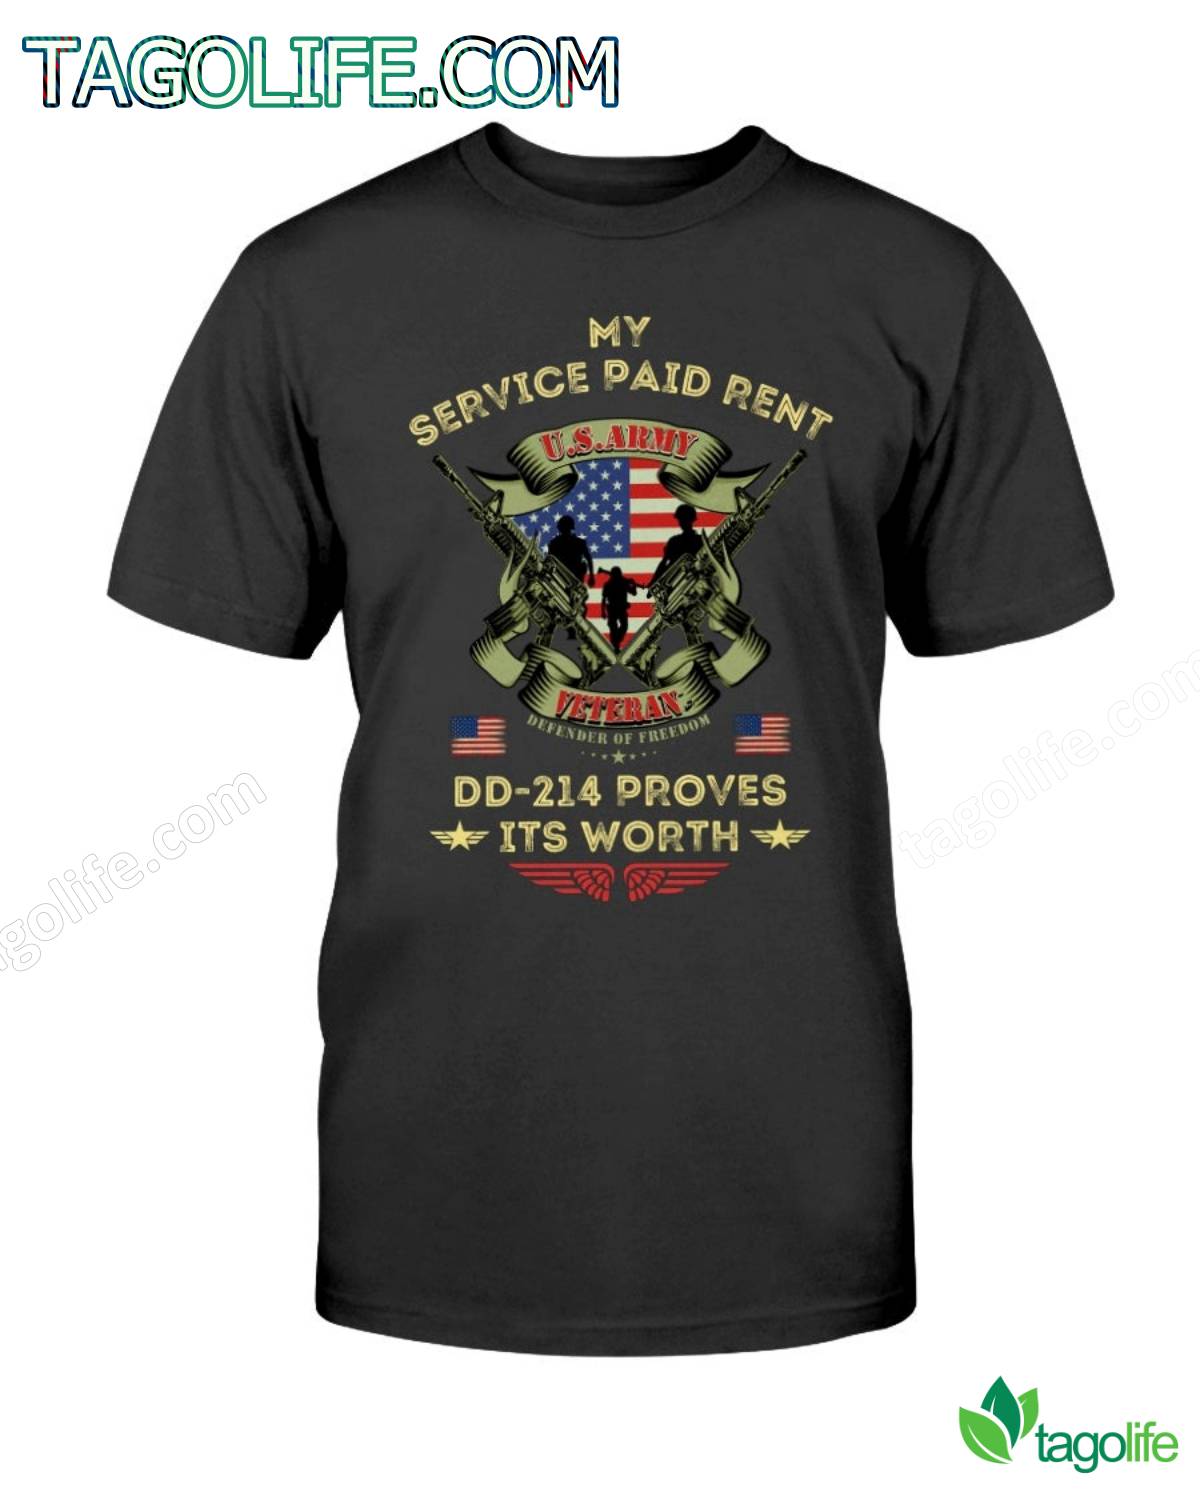 My Service Paid Rent Dd-214 Proves Its Worth Us Army Veteran Shirt